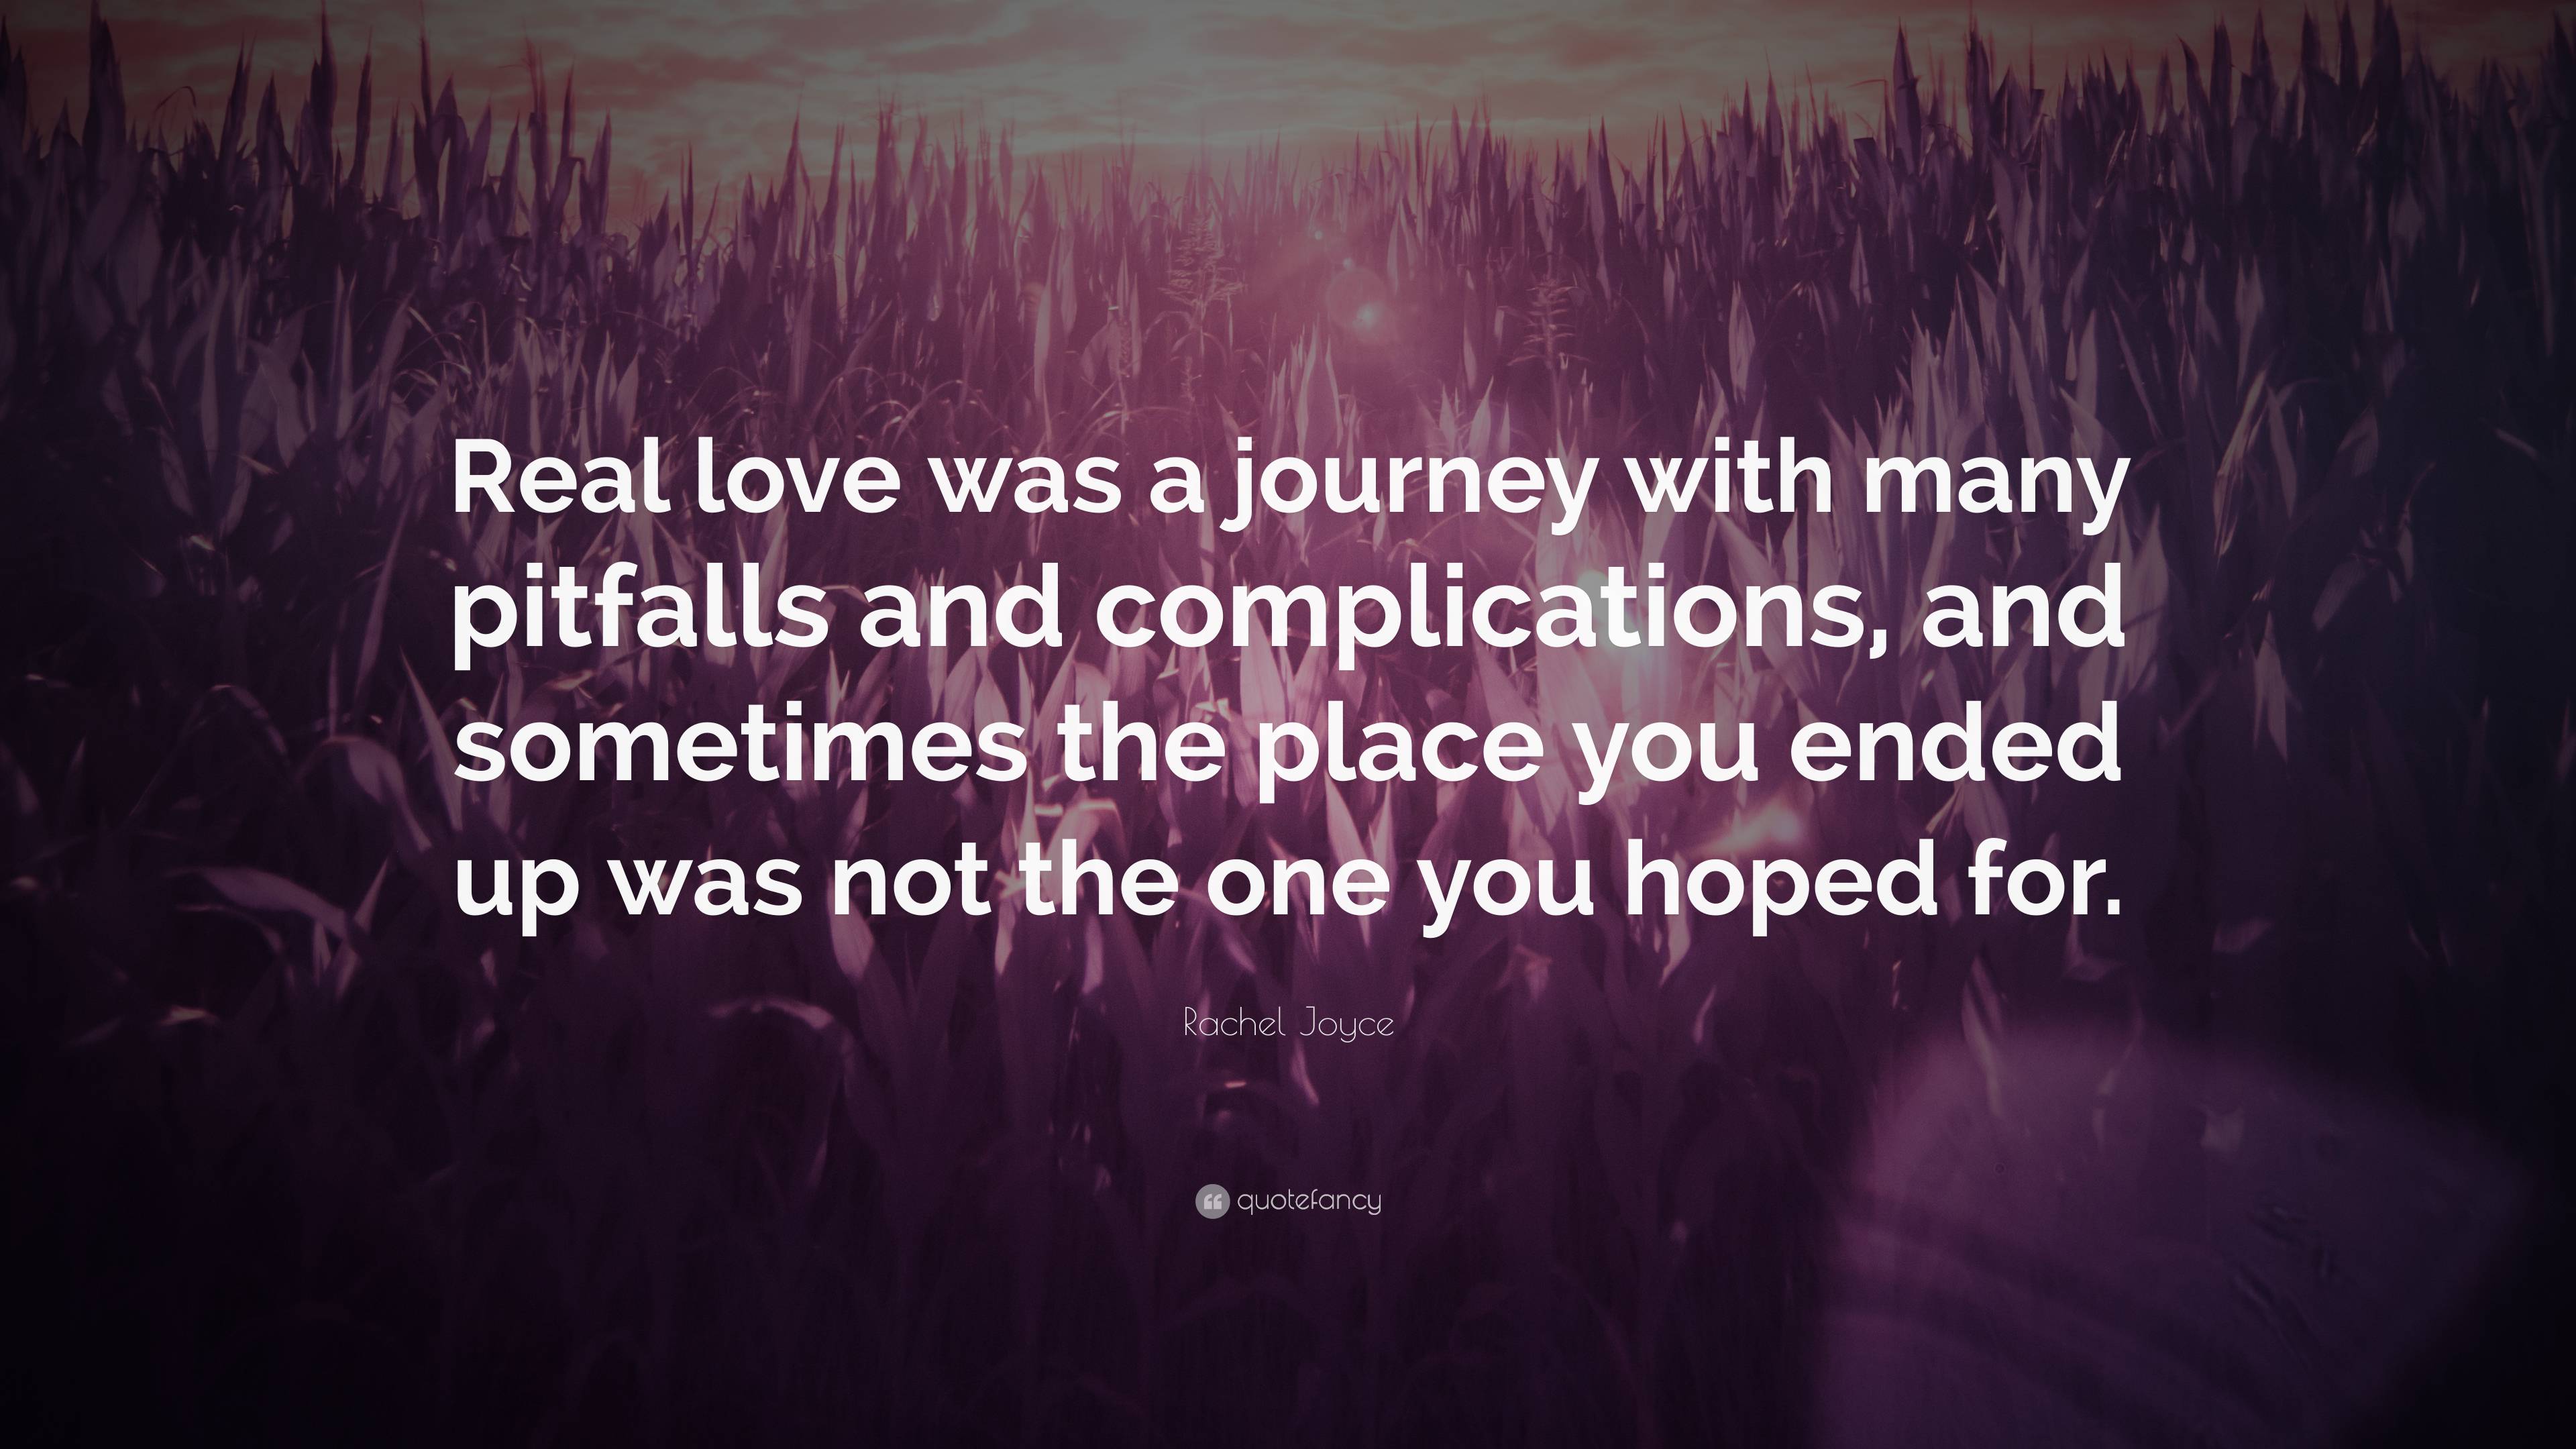 Rachel Joyce Quote: “Real love was a journey with many pitfalls